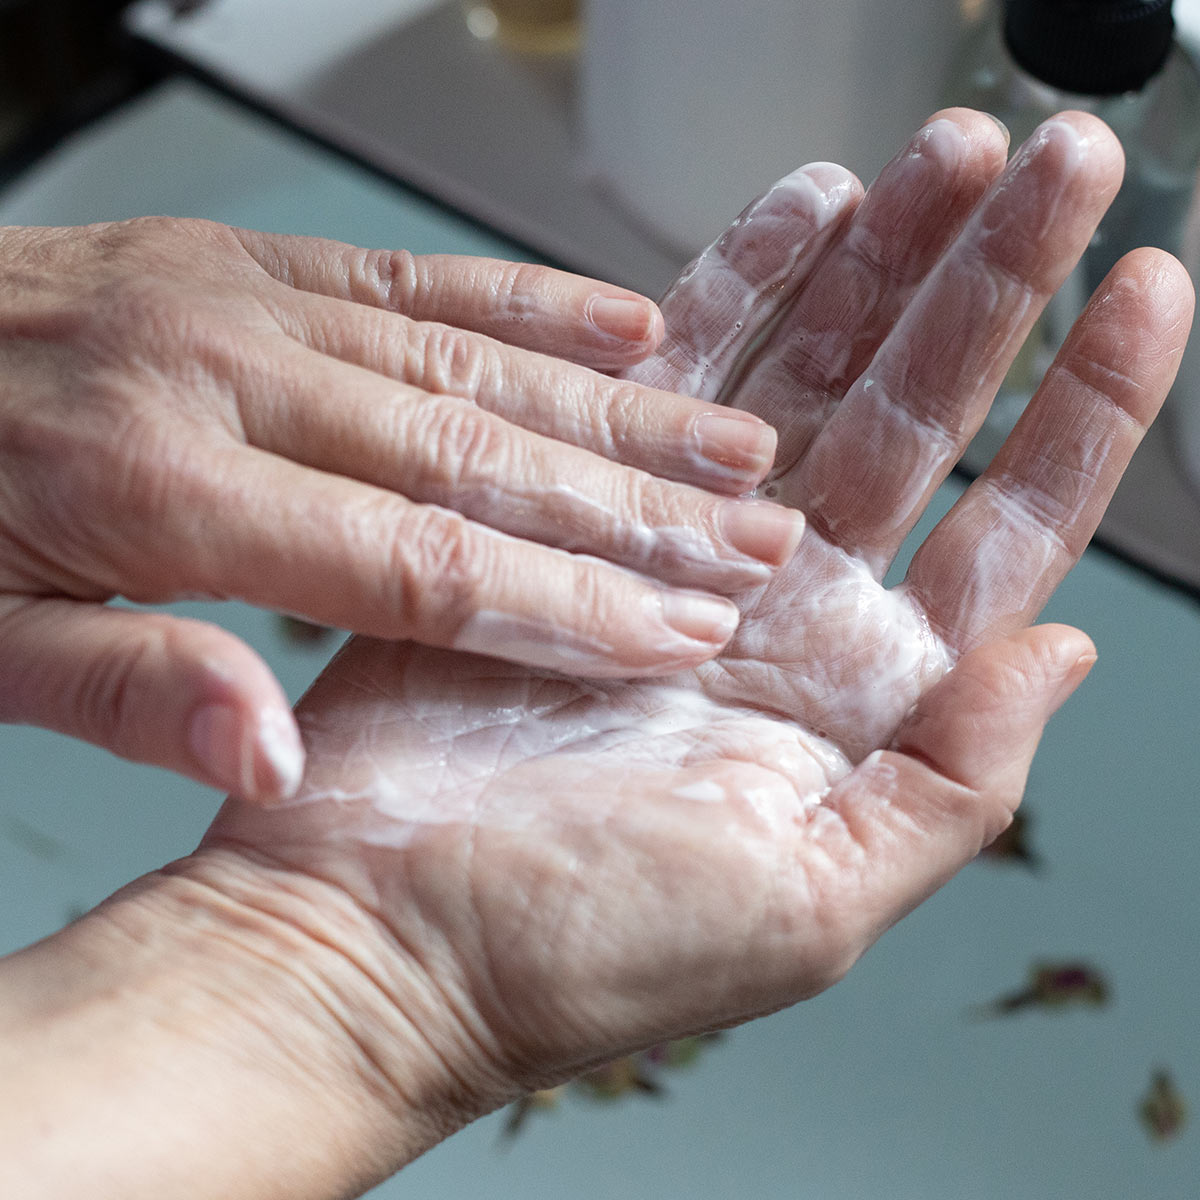 creamy facial cleansing milk cleanser mixed between palm of hands over sink